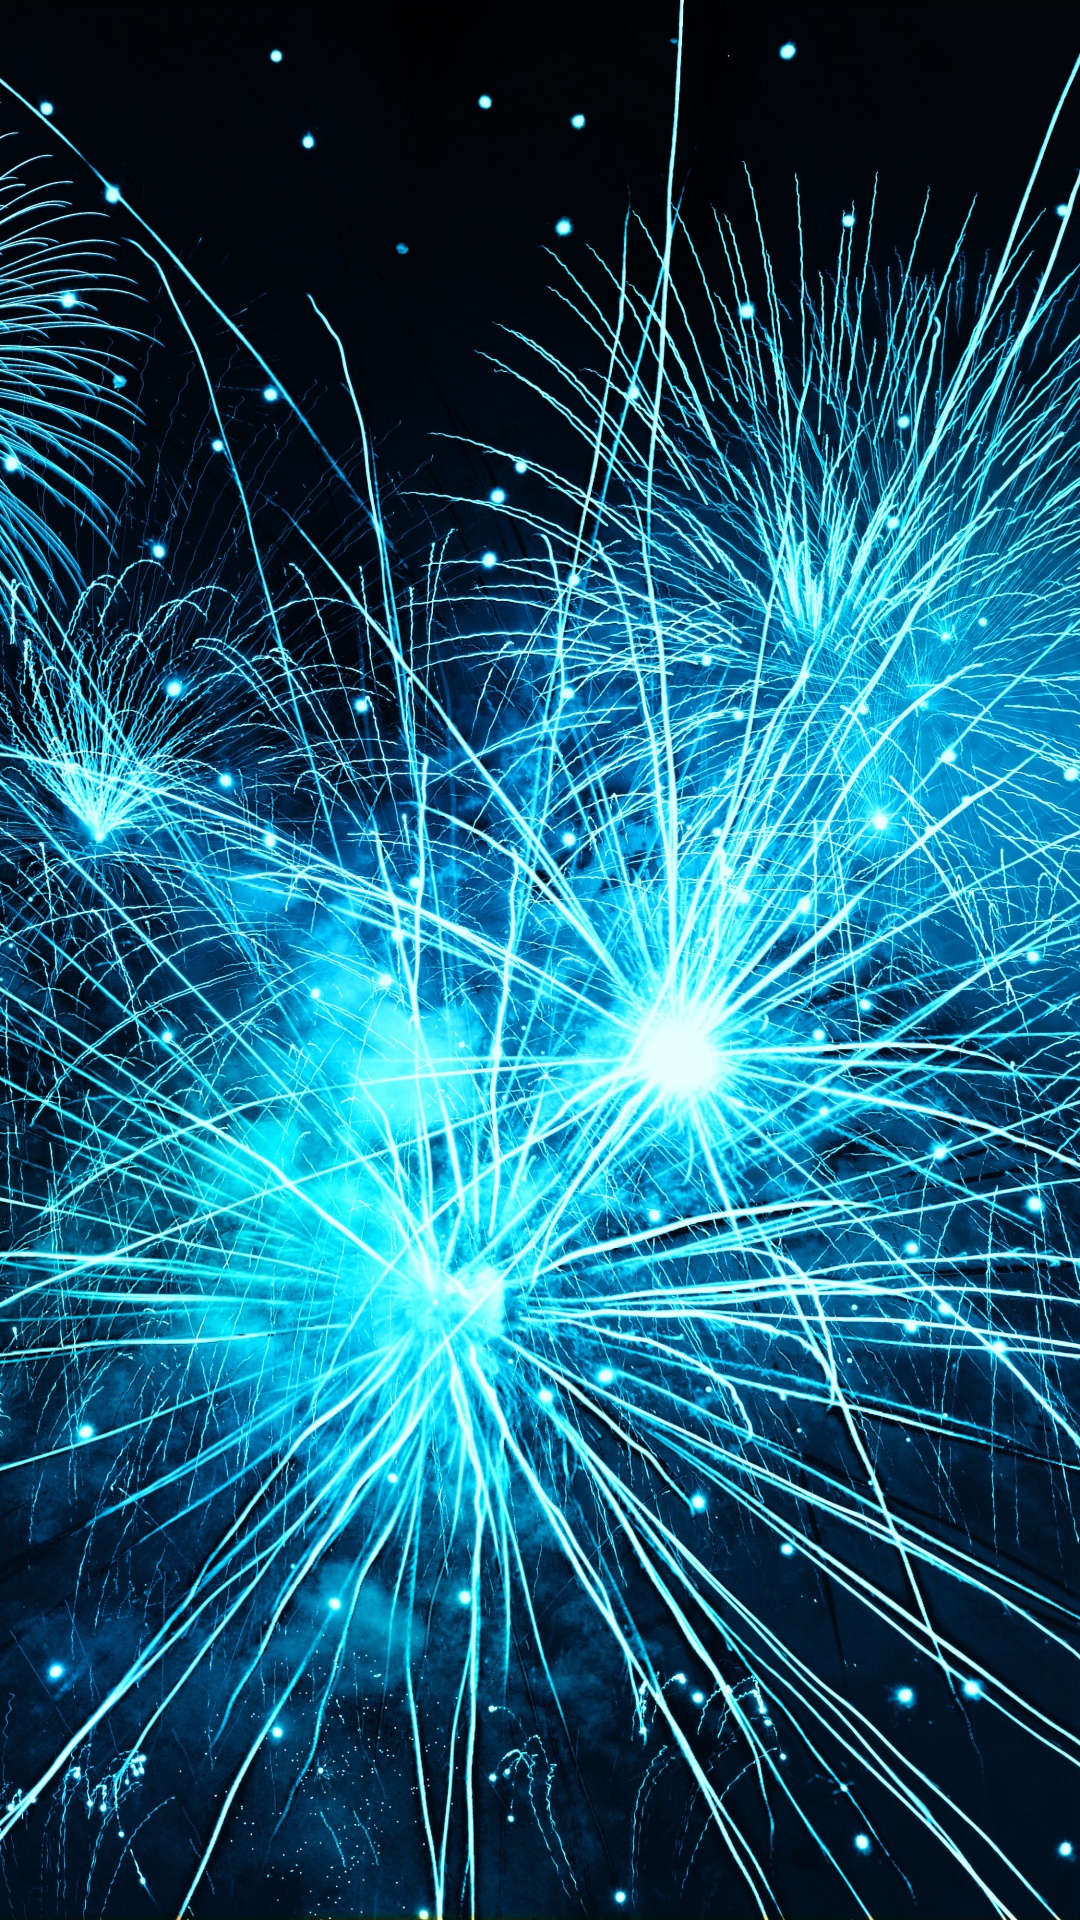 New Years Eve, New Year, New Years Day, Party, Fireworks. Wallpaper in 1080x1920 Resolution